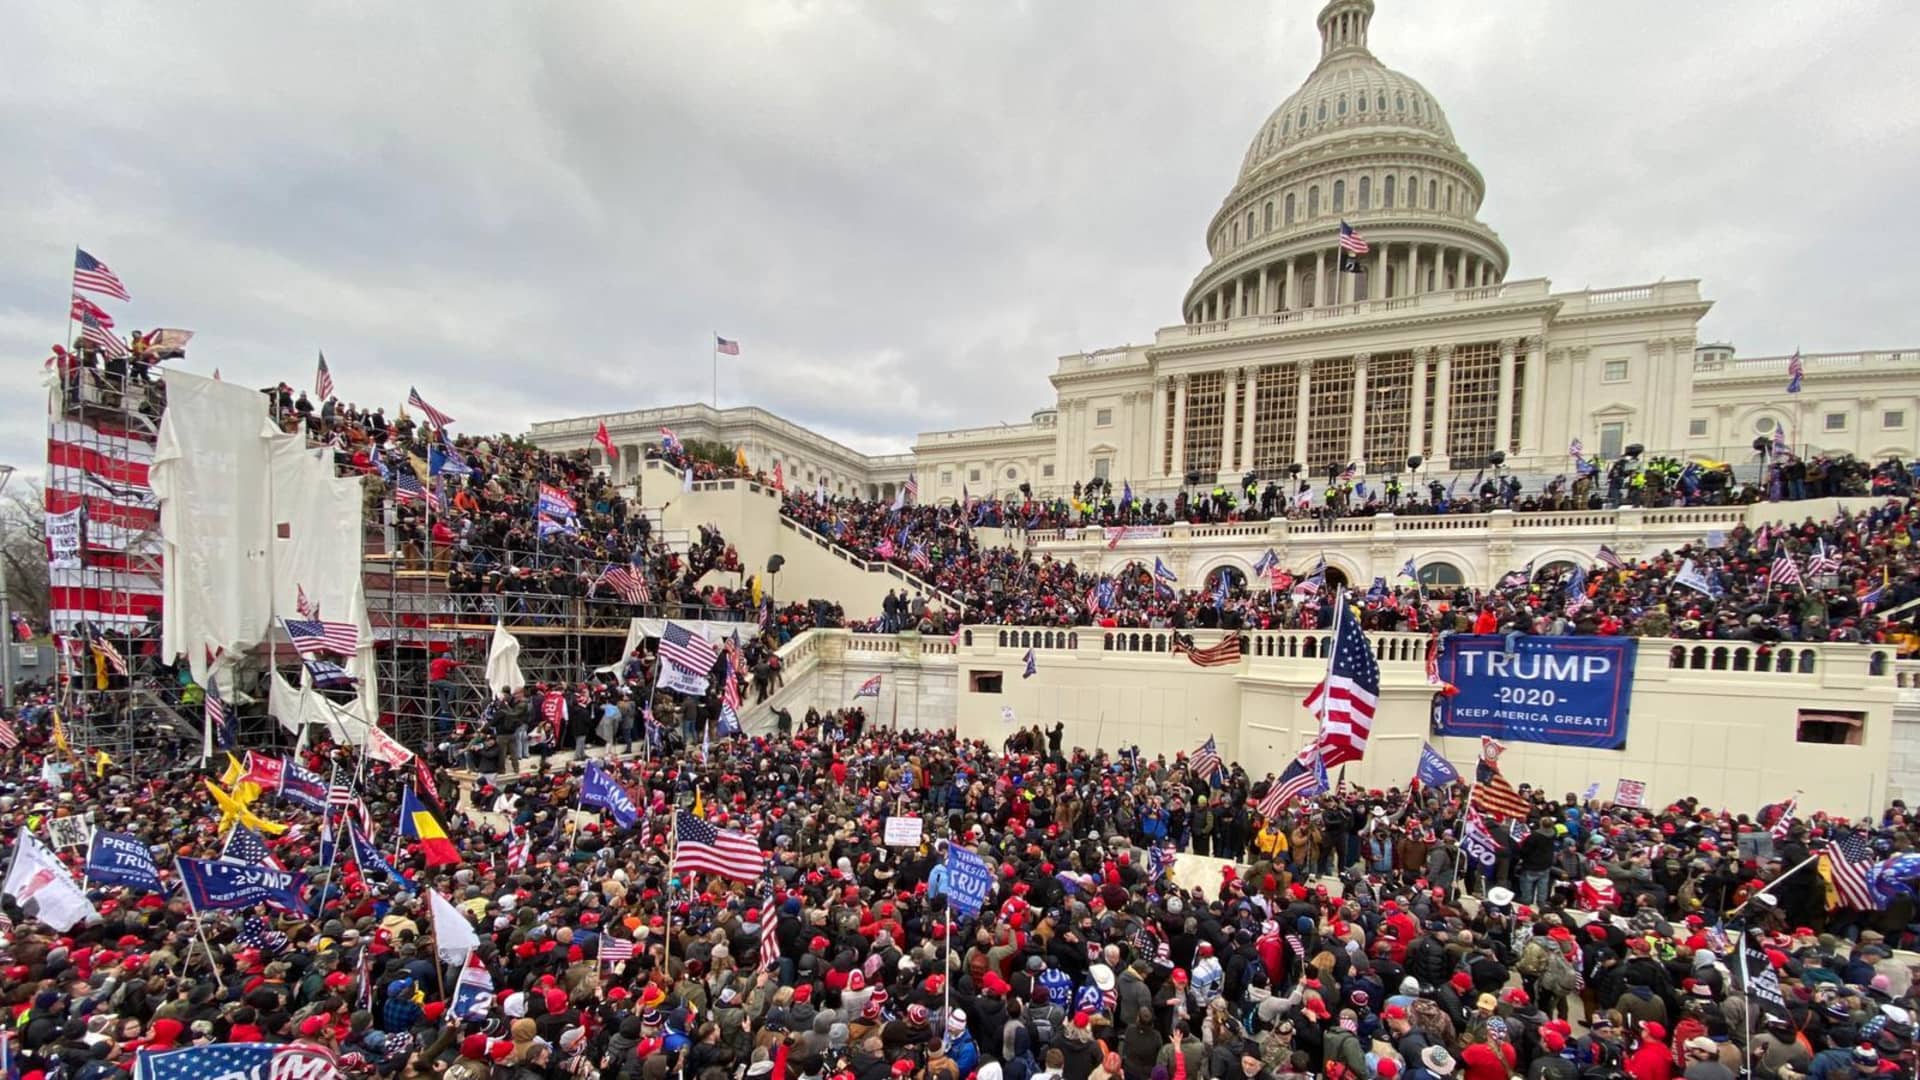 US President Donald Trumps supporters gather outside the Capitol building in Washington D.C., United States on January 06, 2021.